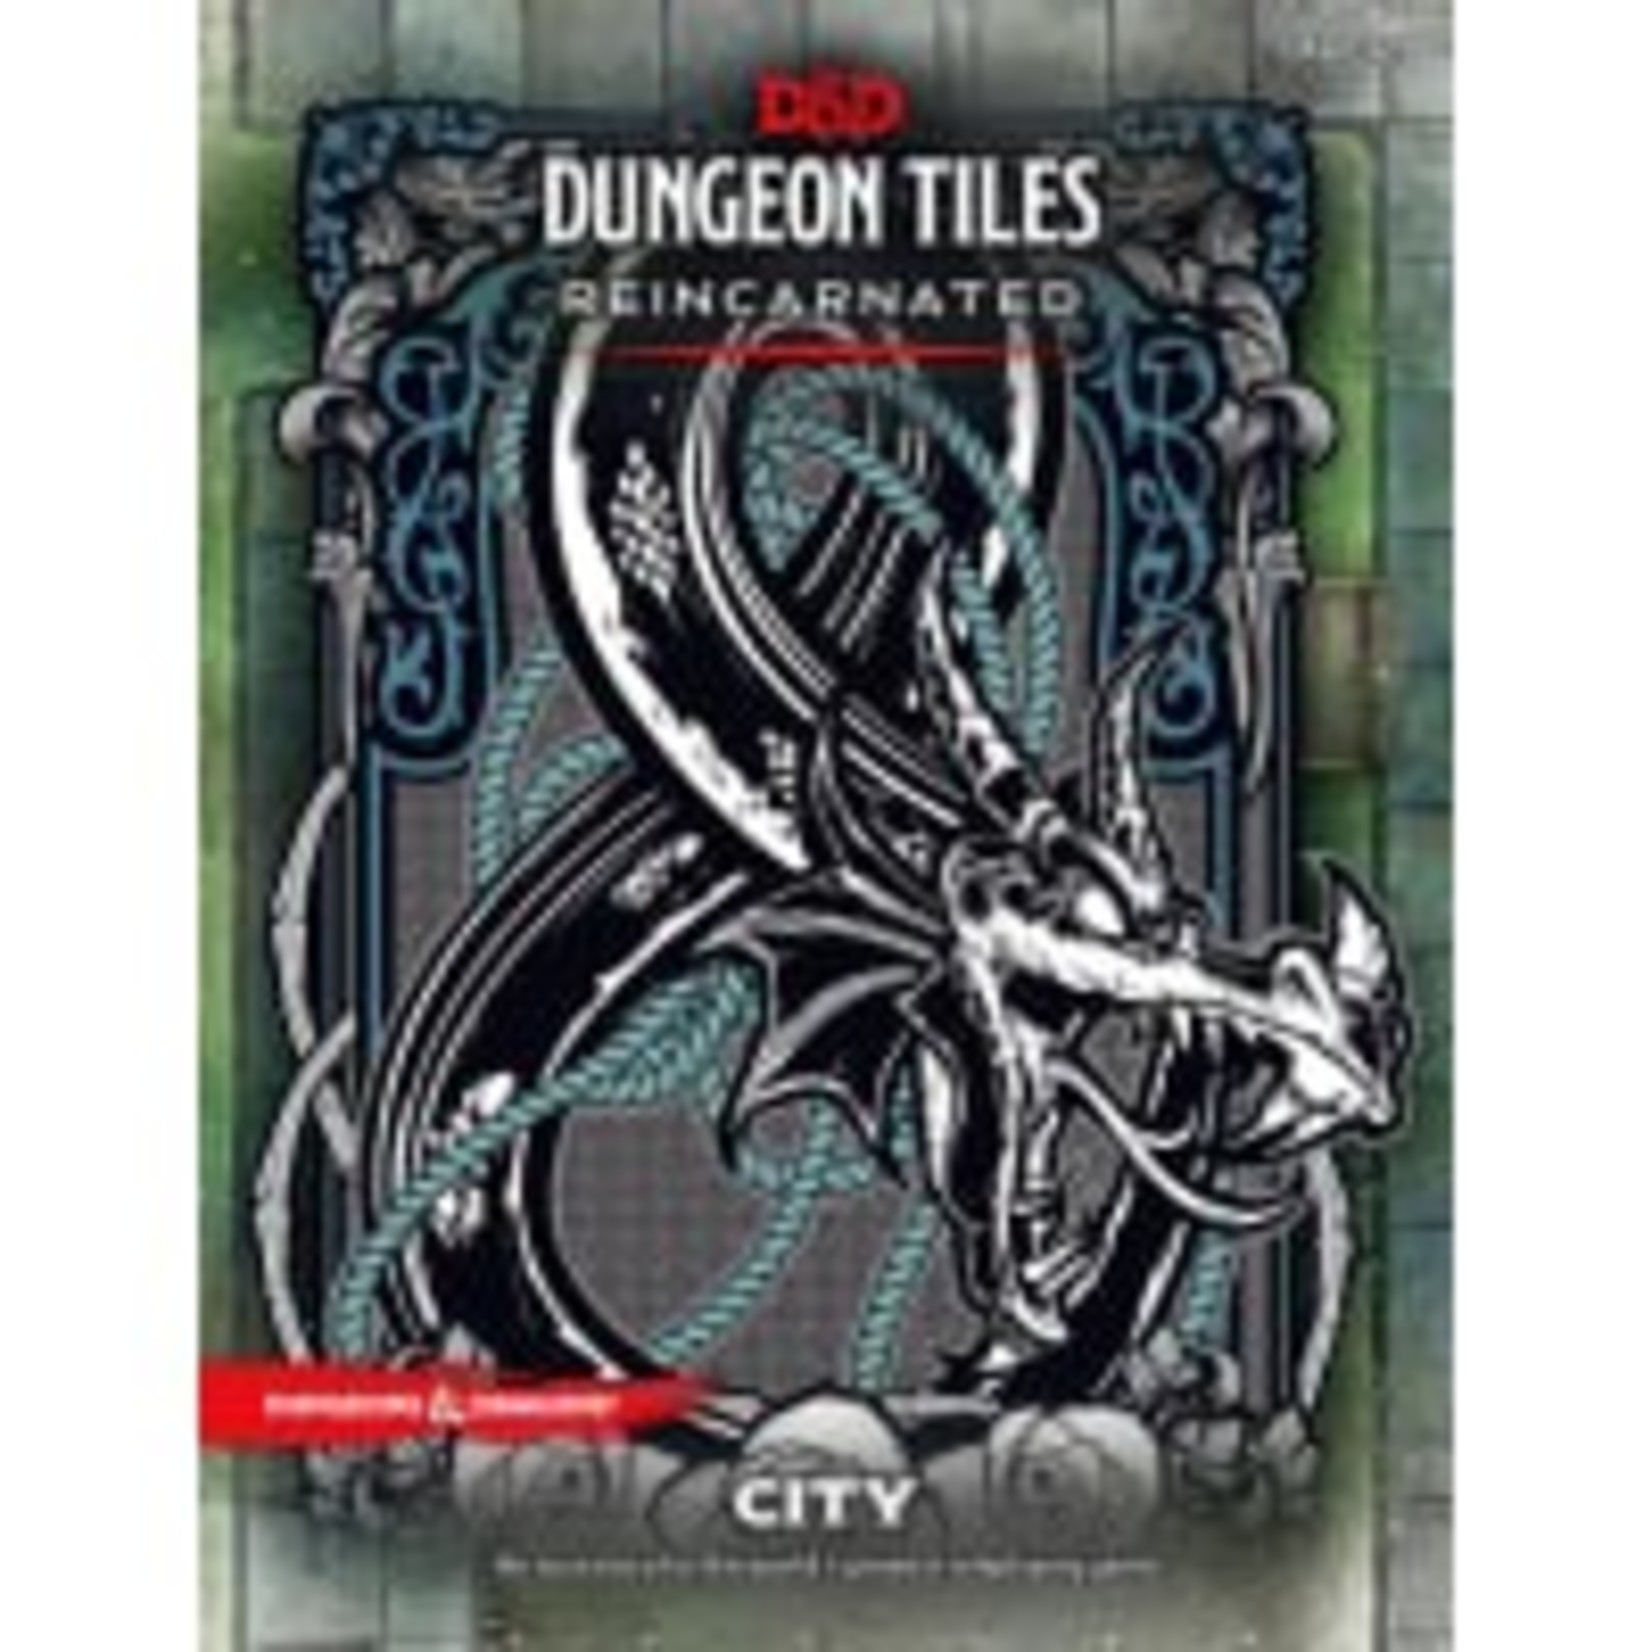 Wizards of the Coast Dungeon Tiles Reincarnated: City